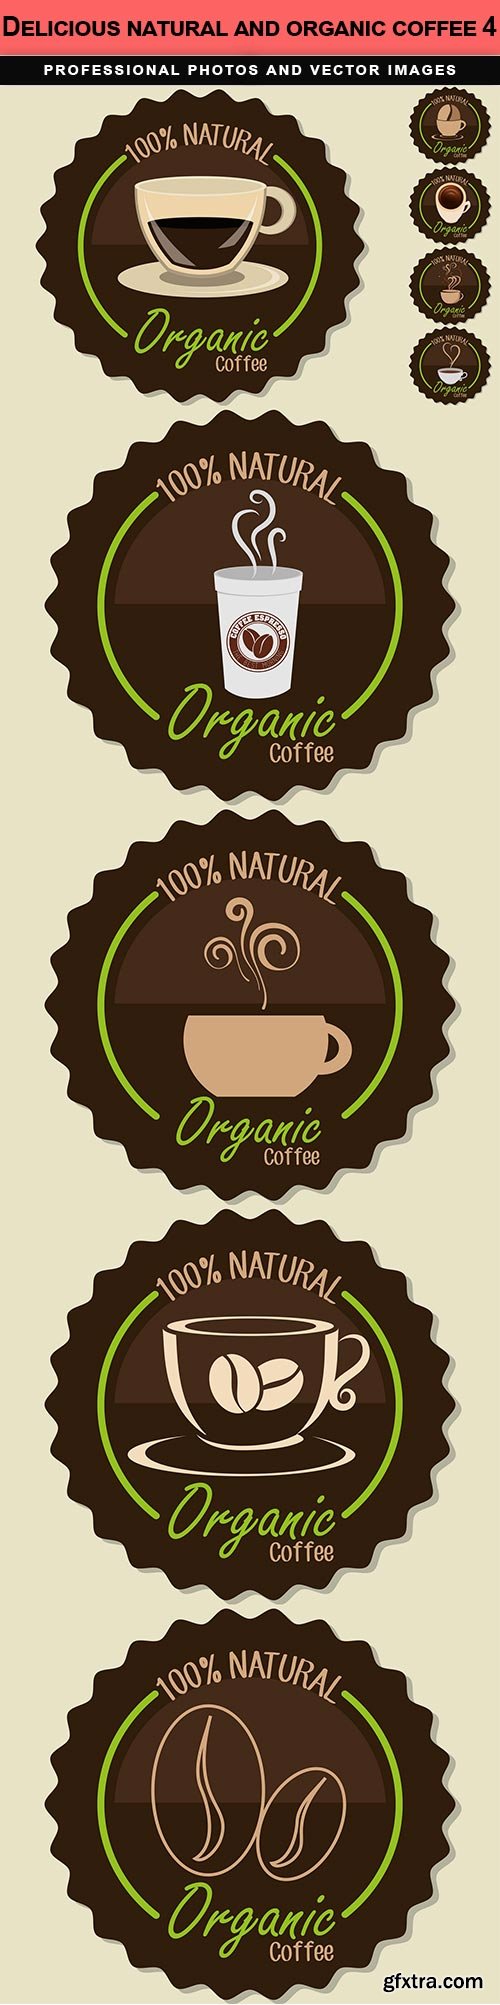 Delicious natural and organic coffee 4